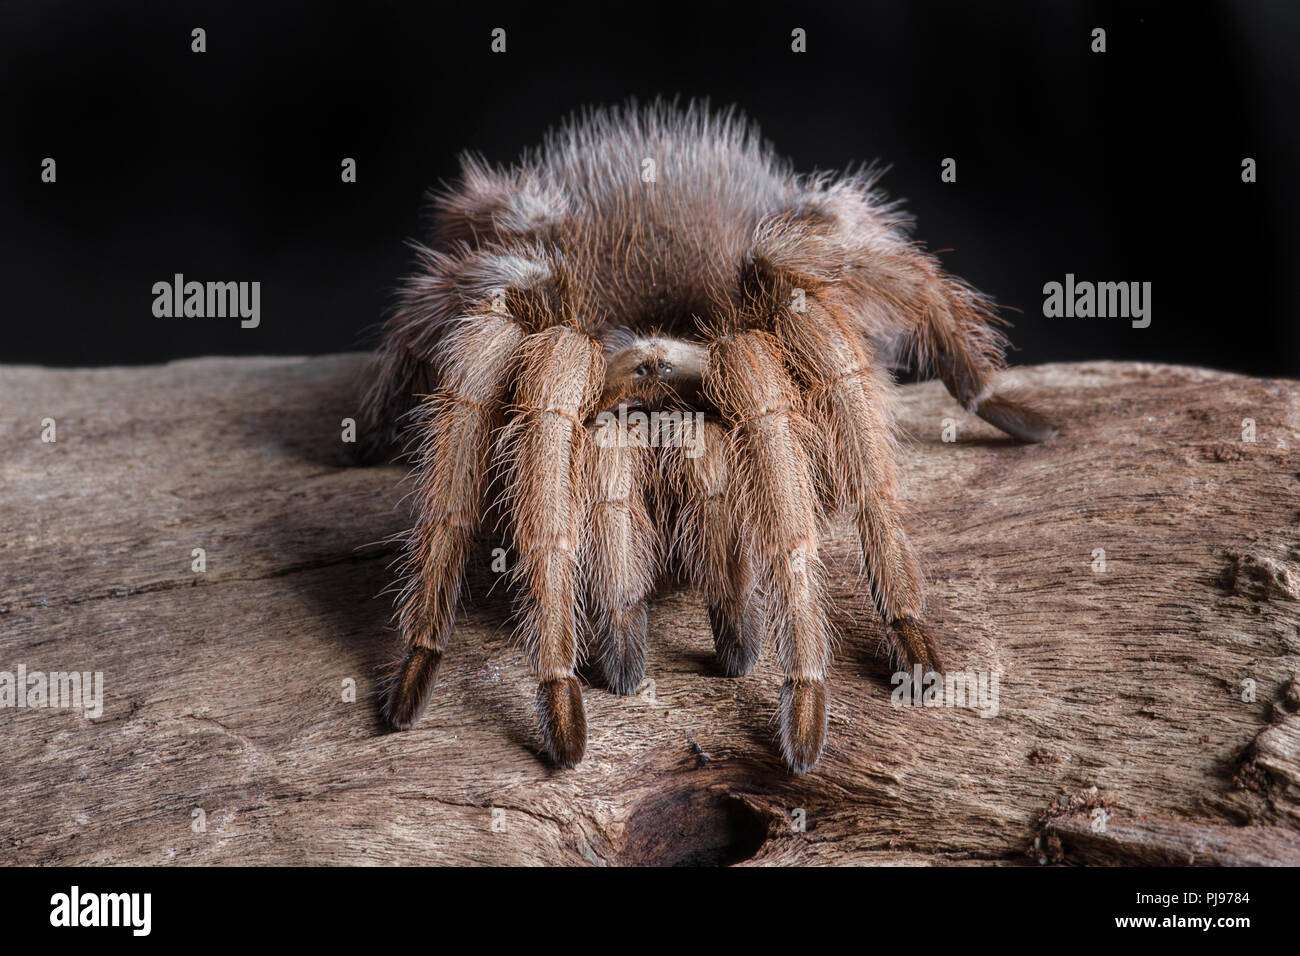 A close portrait of a texas brown tarantula. It is facing forward on a piece of wood. The photograph is set against a black background Stock Photo